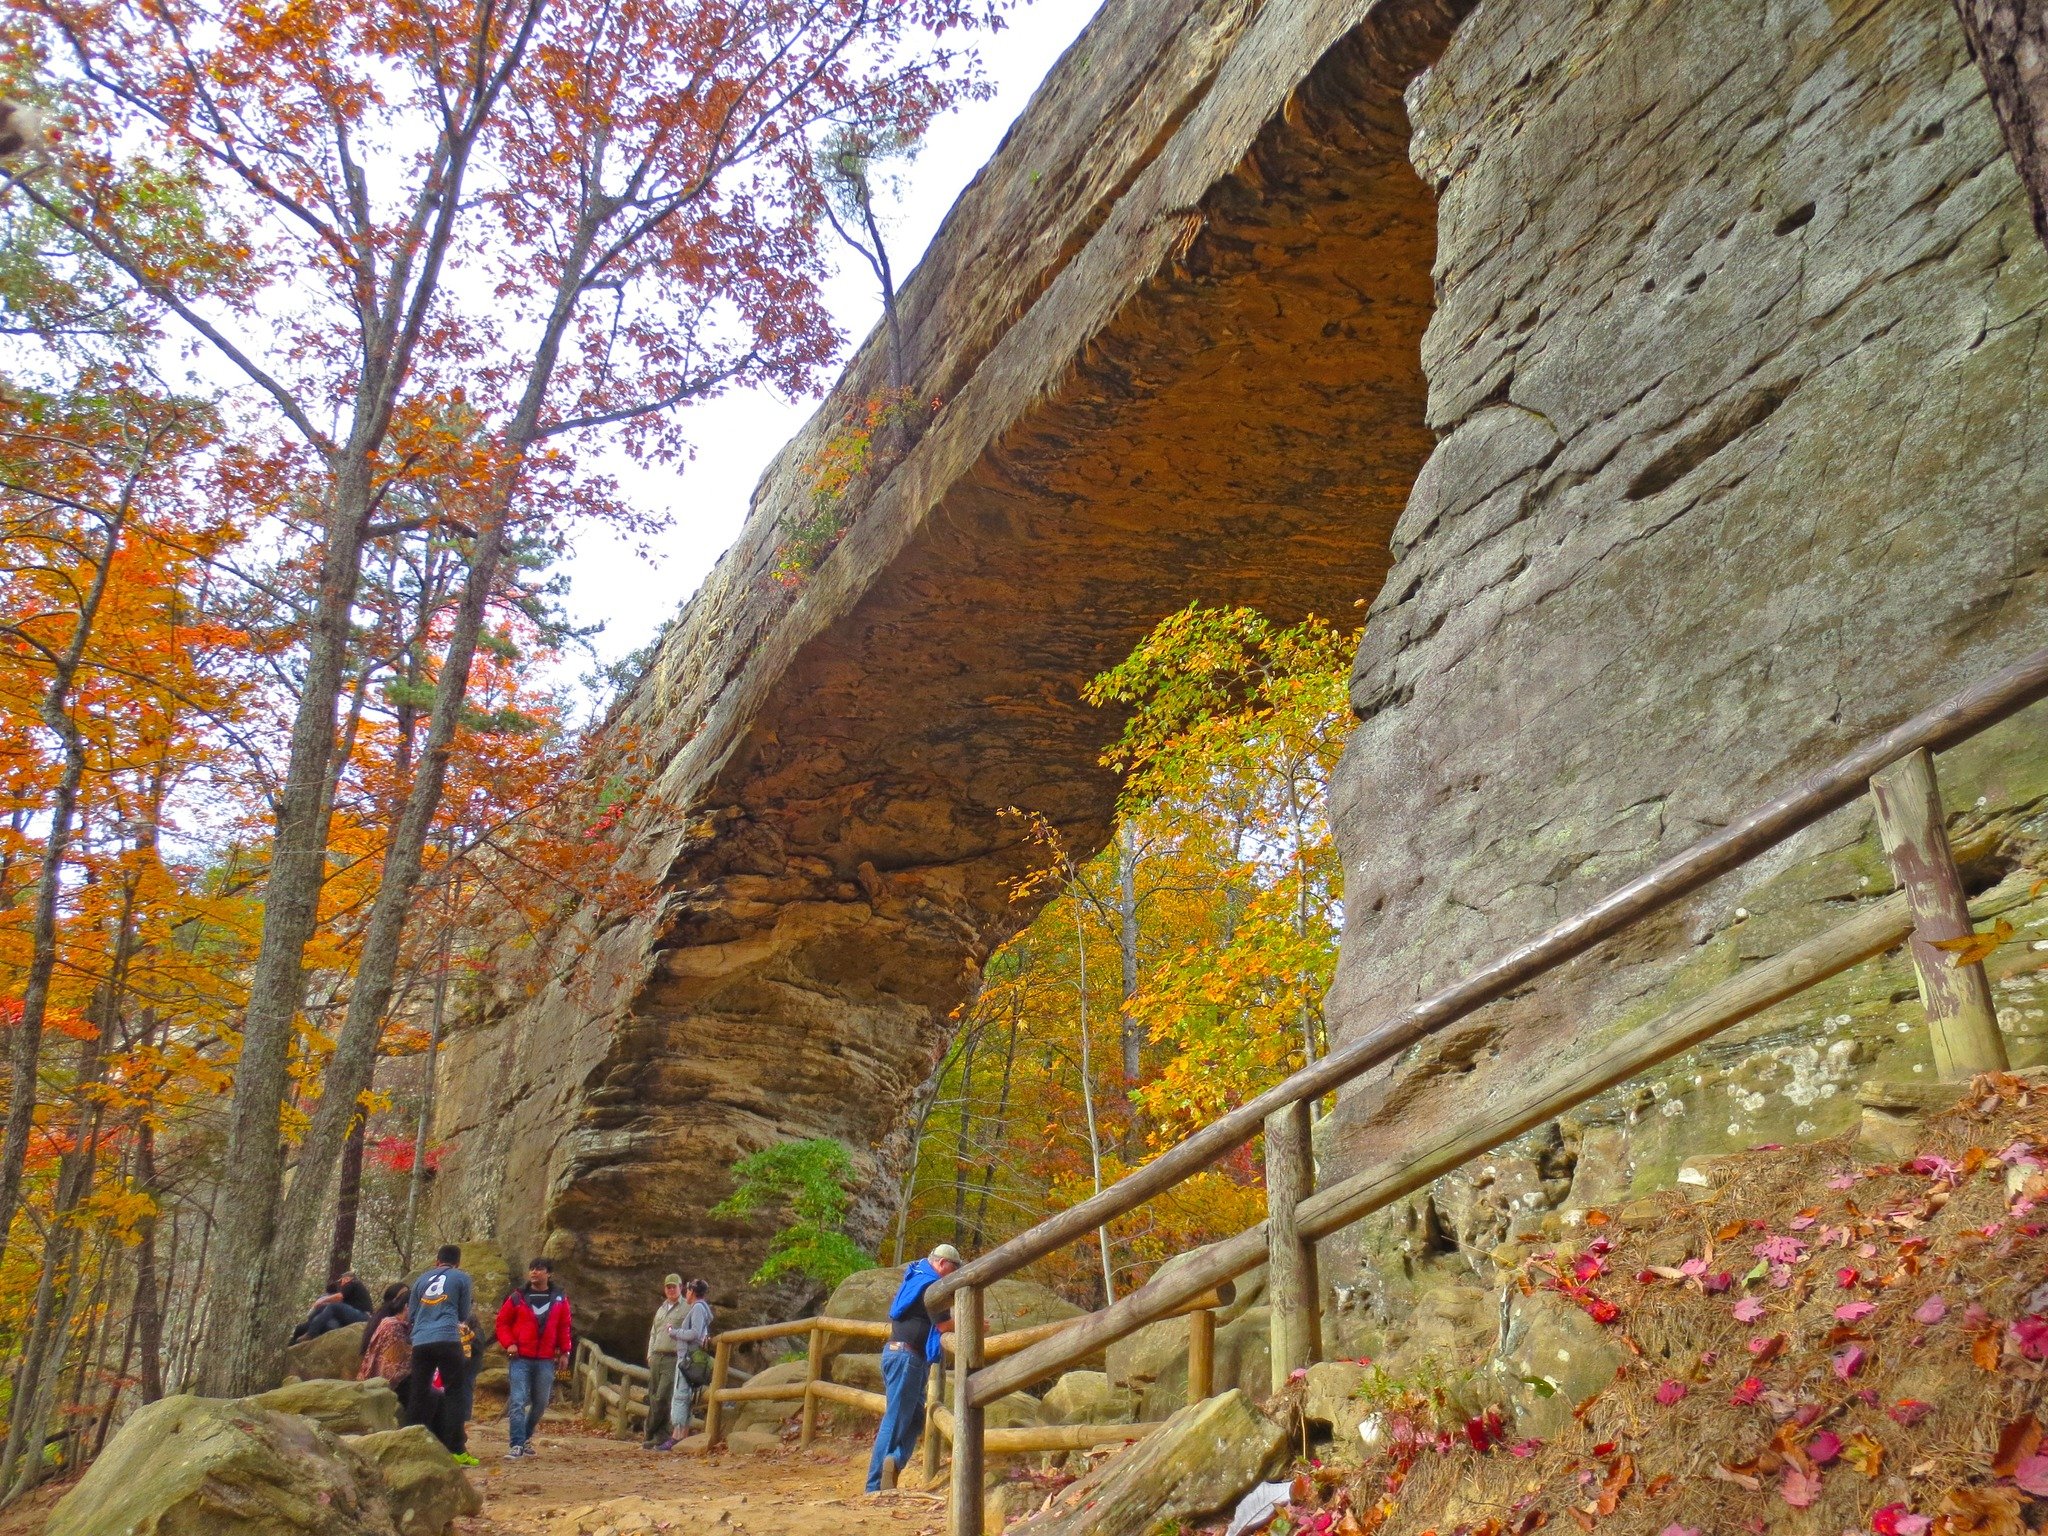 Magazine names Natural Bridge as best state park in US